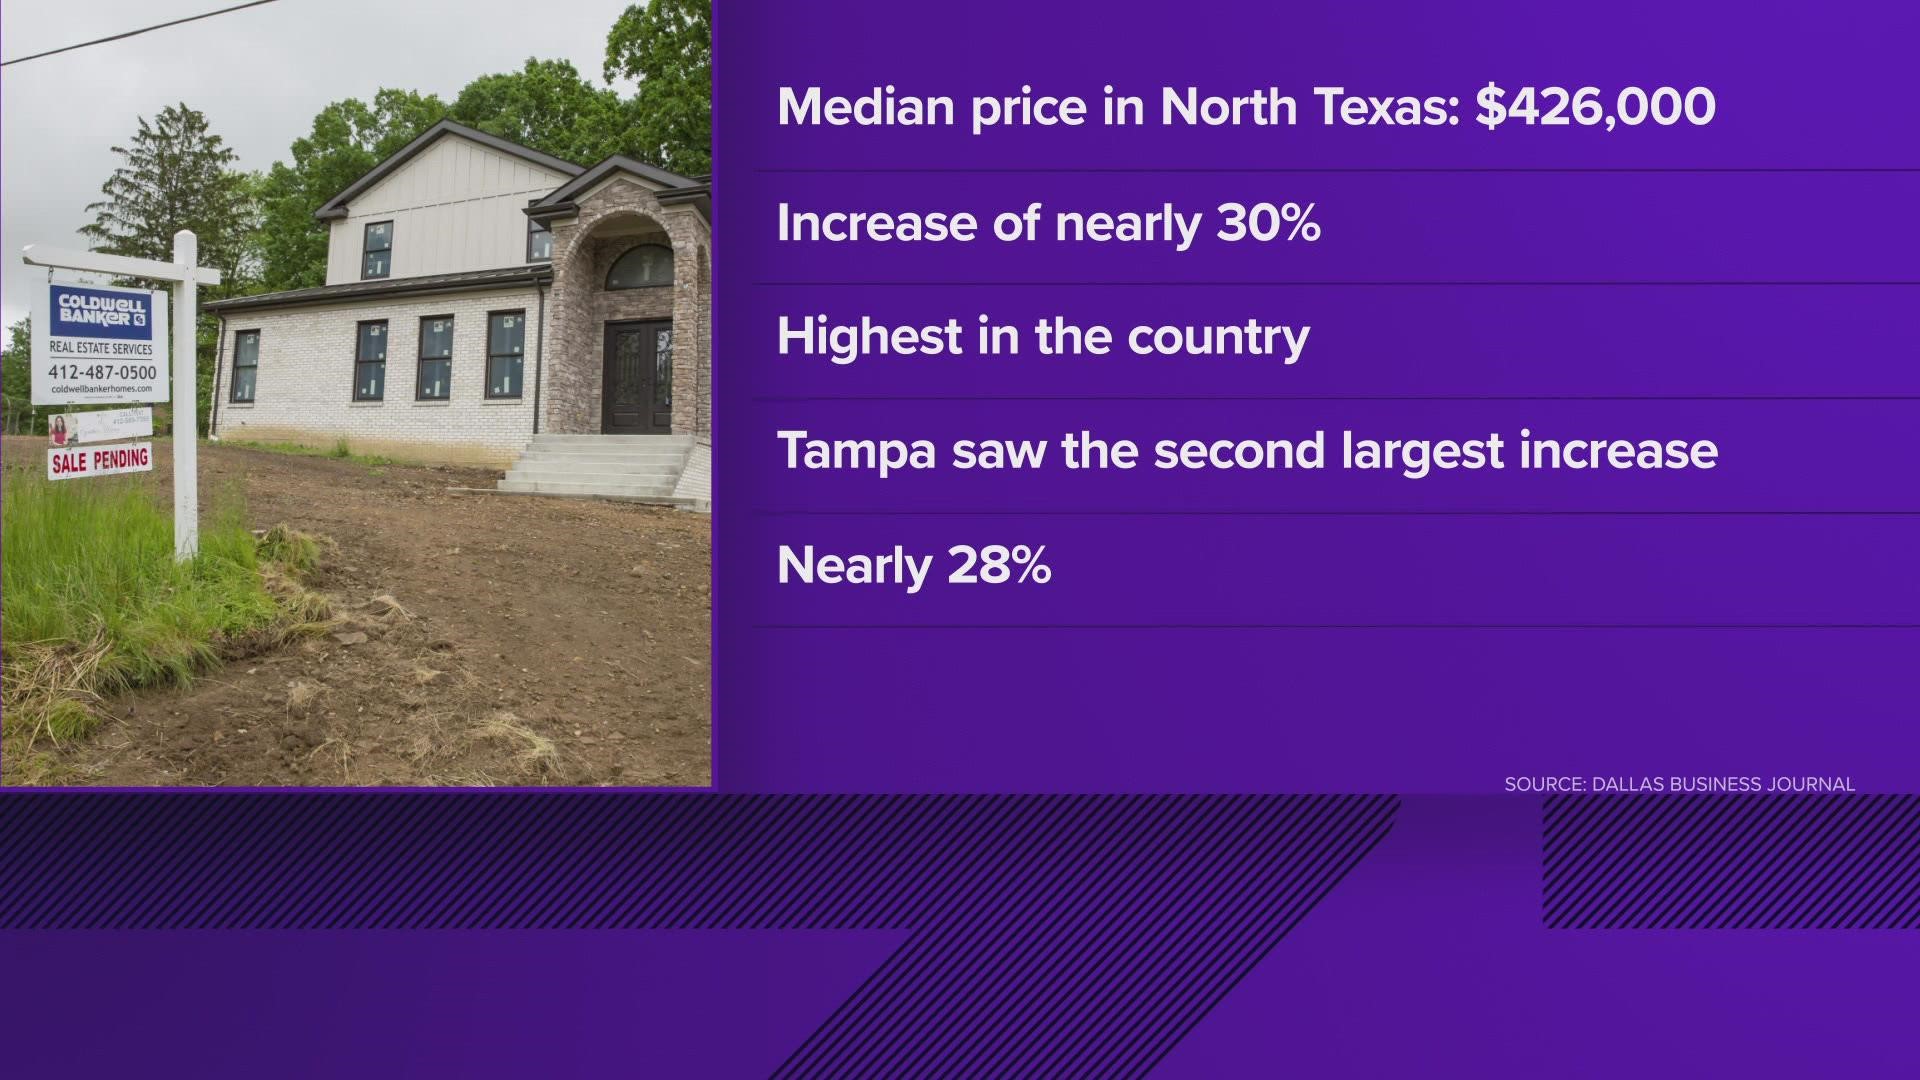 The median home price in the US hit a record high, and North Texas has followed suit.